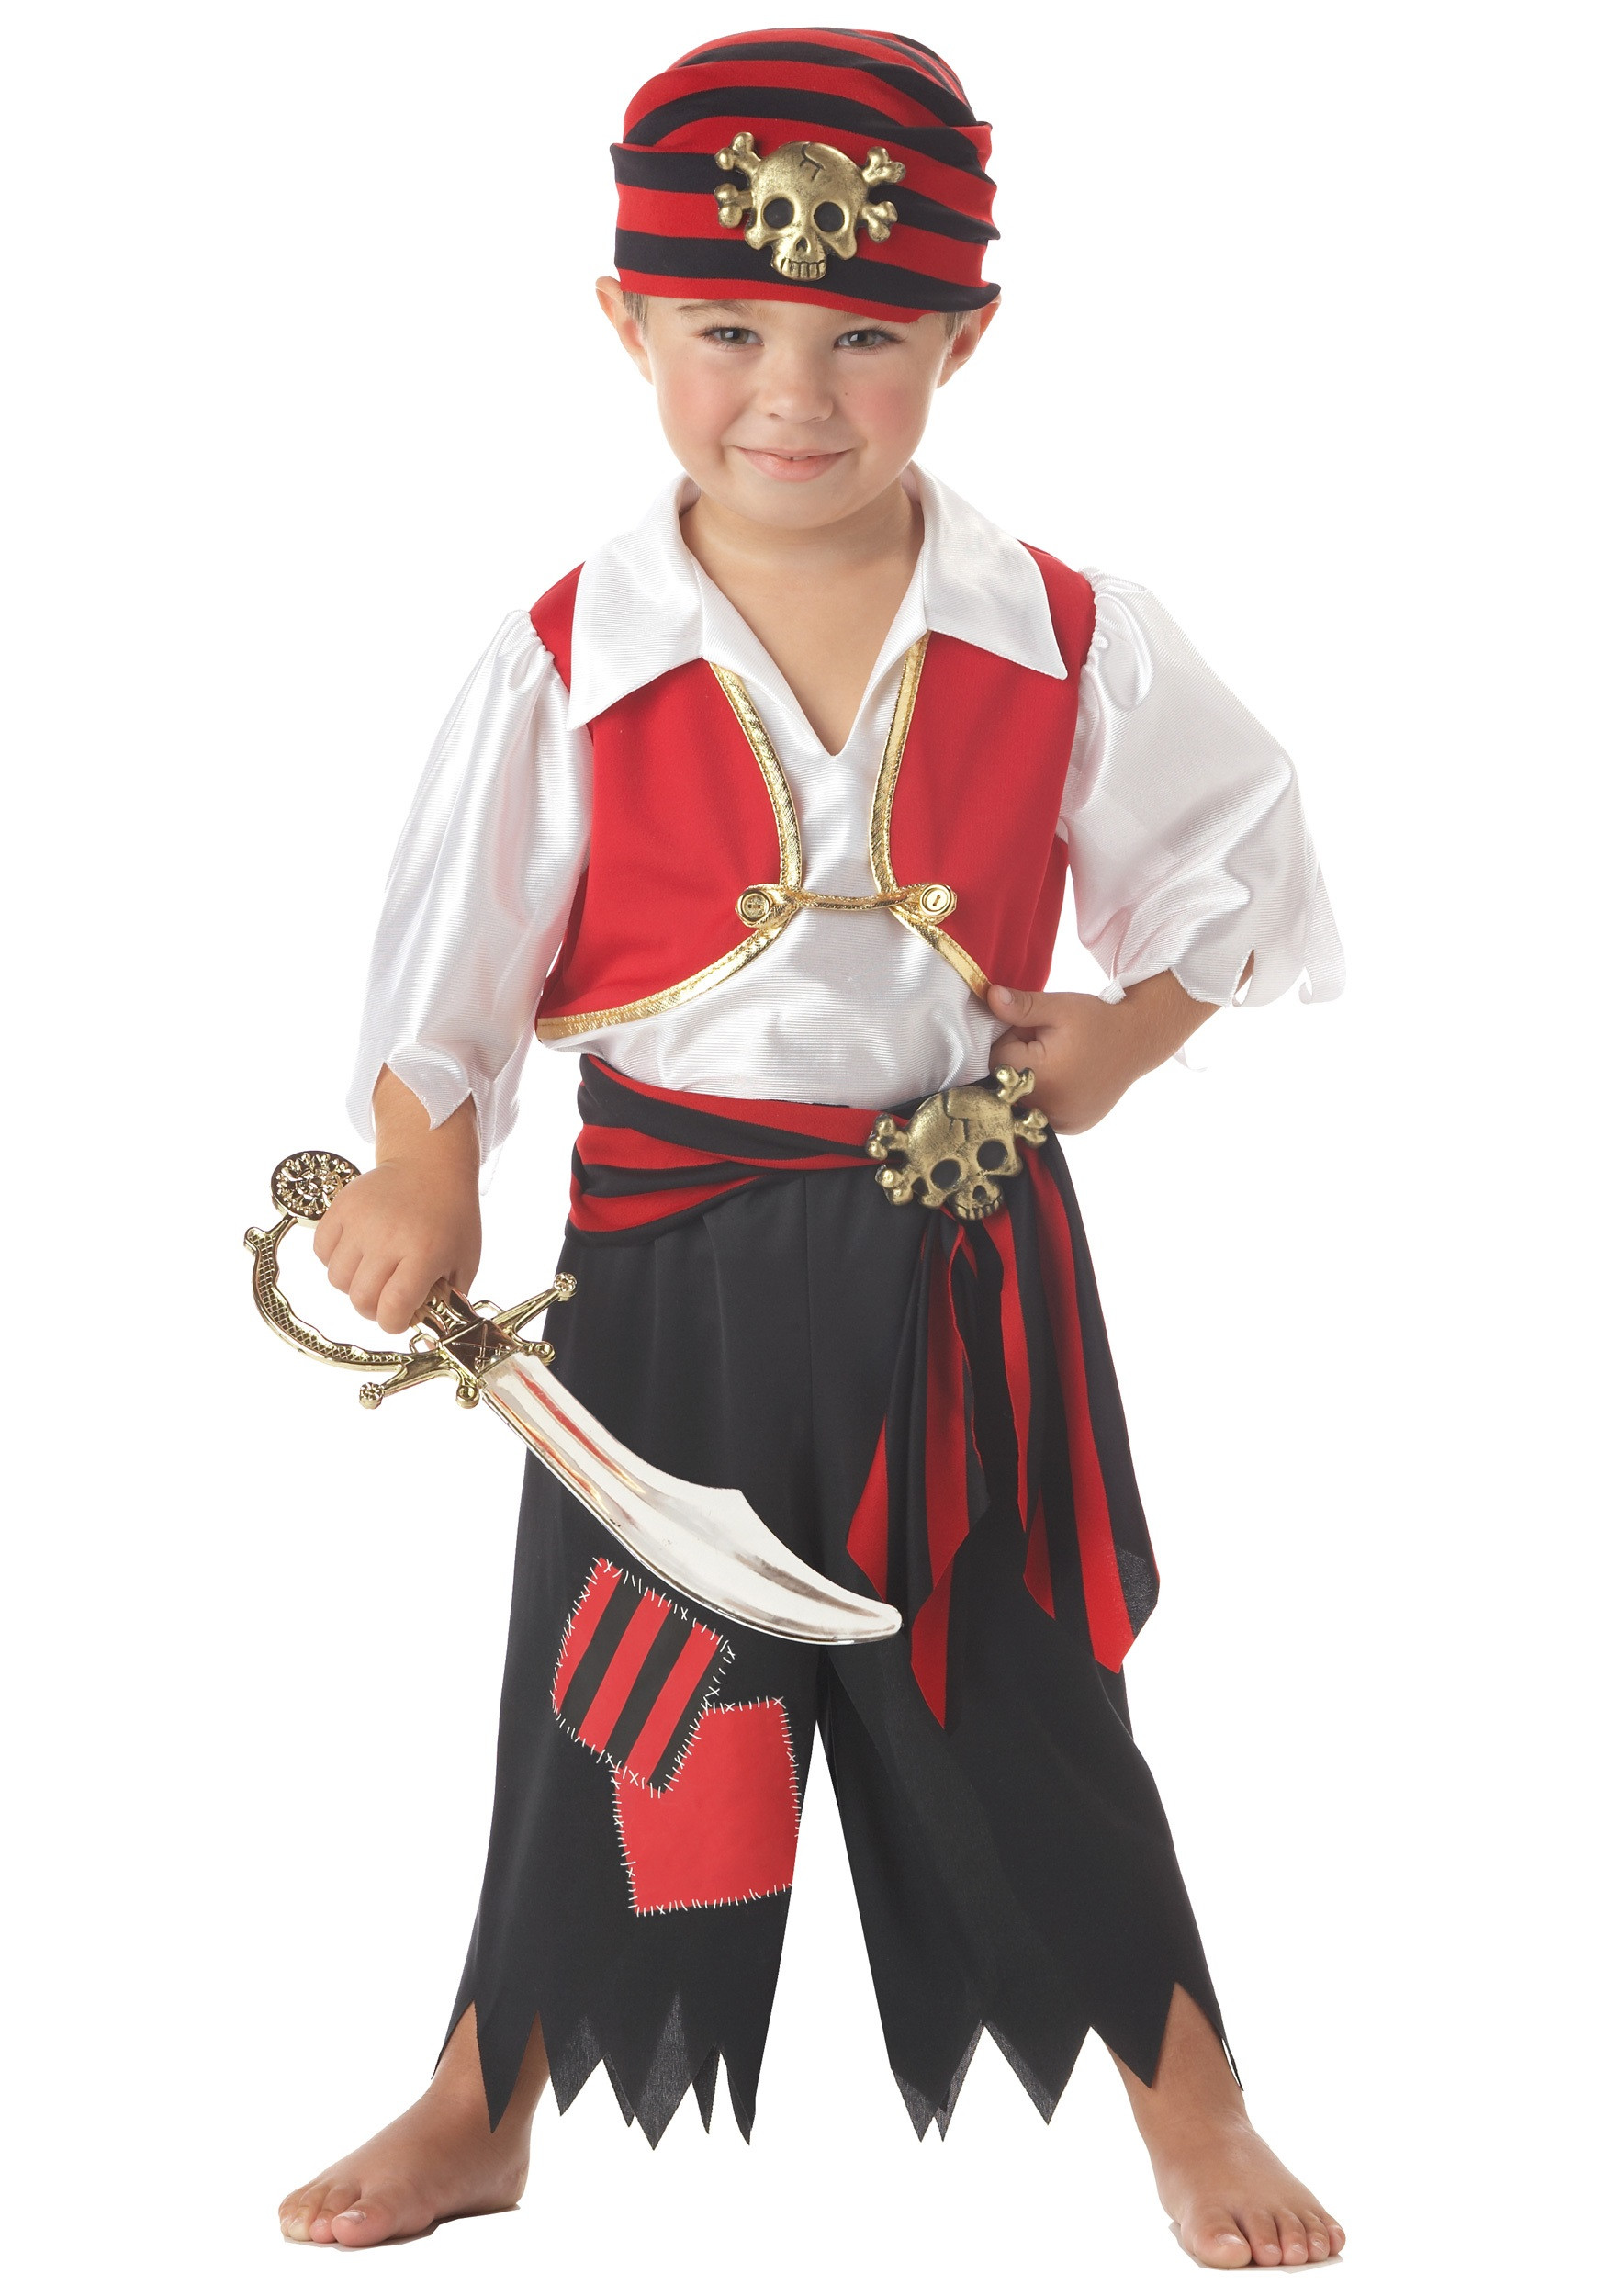 DIY Halloween Costumes For Toddler Boys
 Toddler Ahoy Matey Pirate Costume